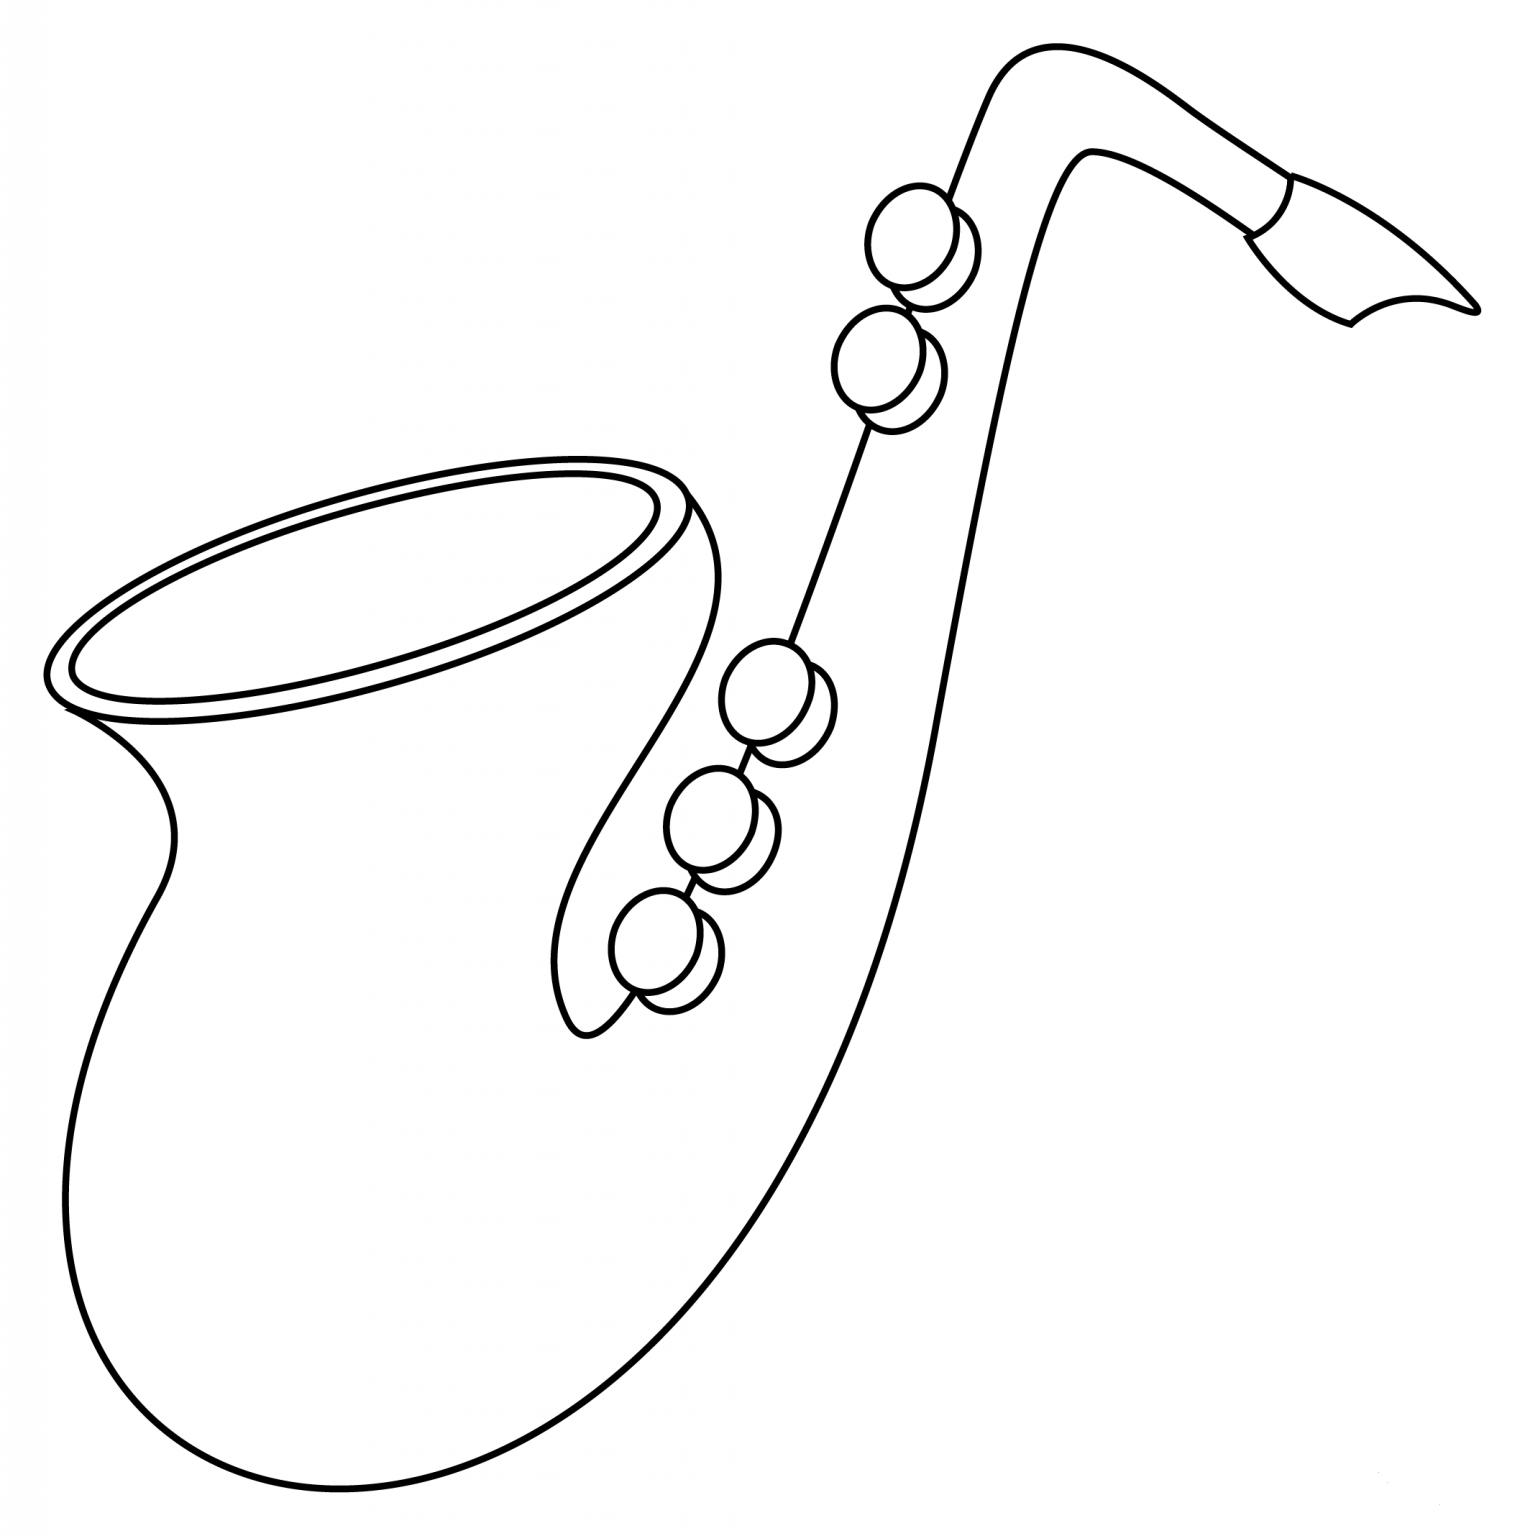 Saxophone coloring page - ColouringPages